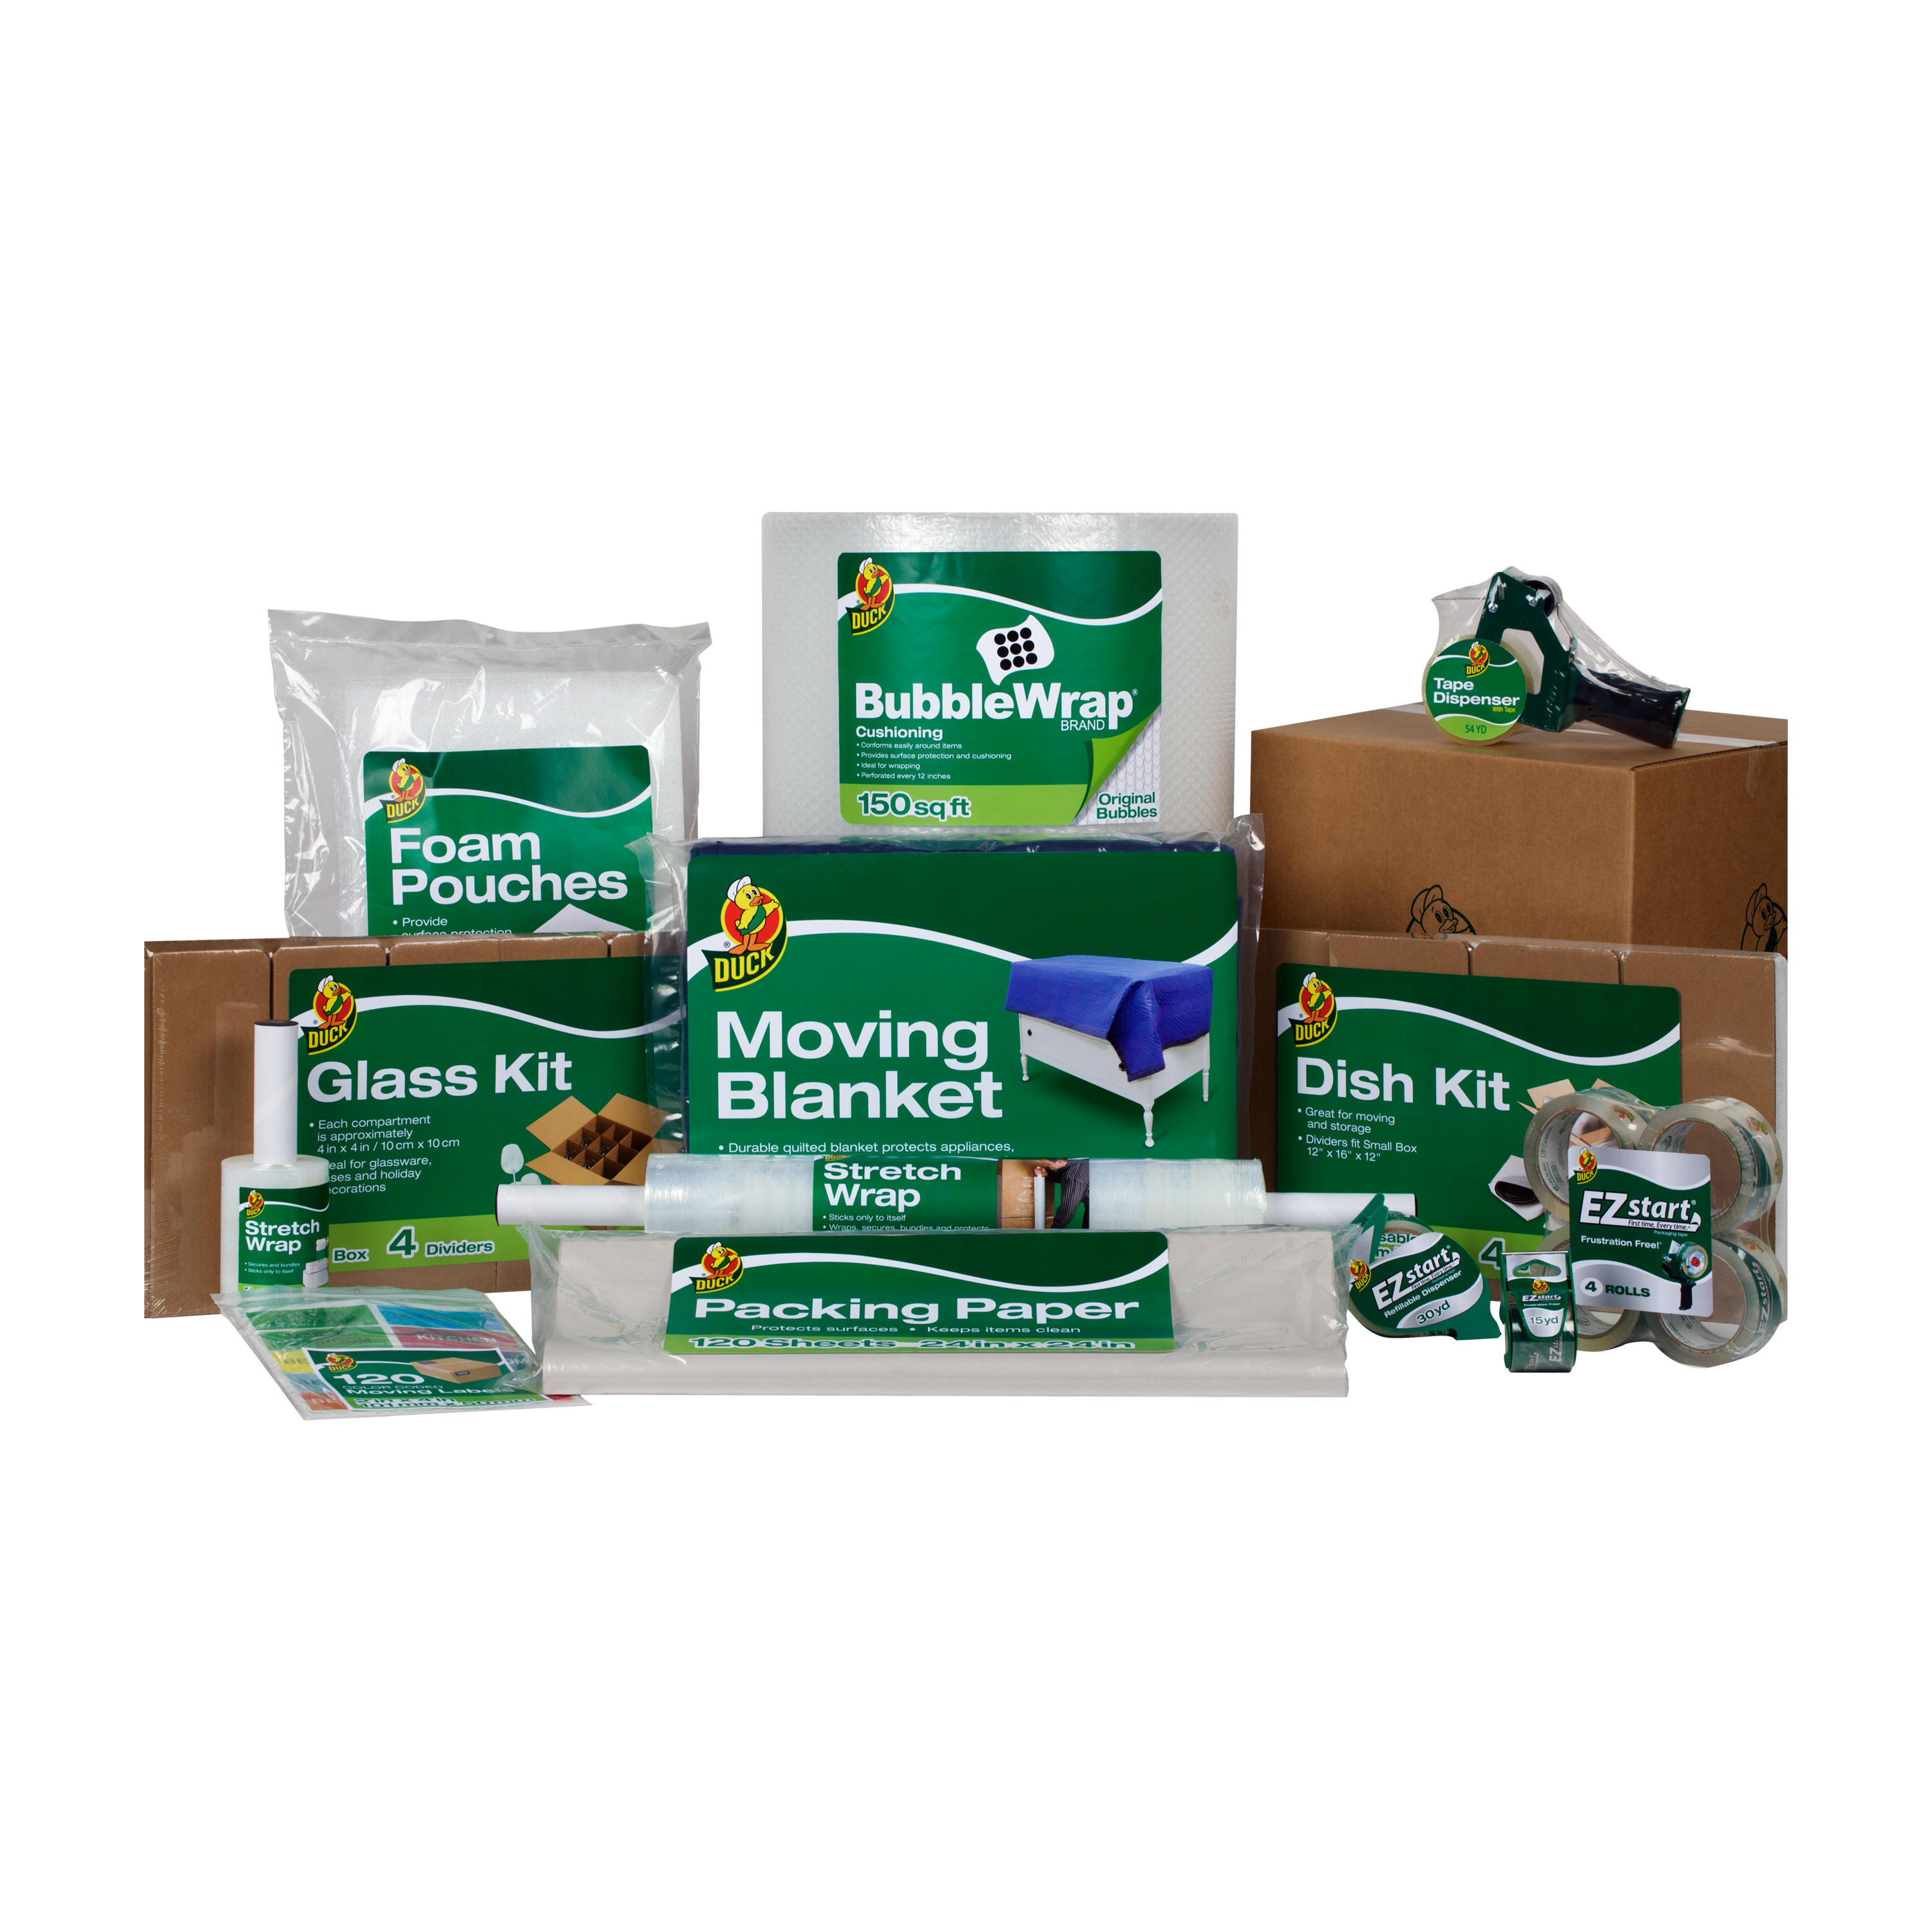 Duck Brand, The Trusted Brand For All Your Mailing, Moving and Storage Needs 